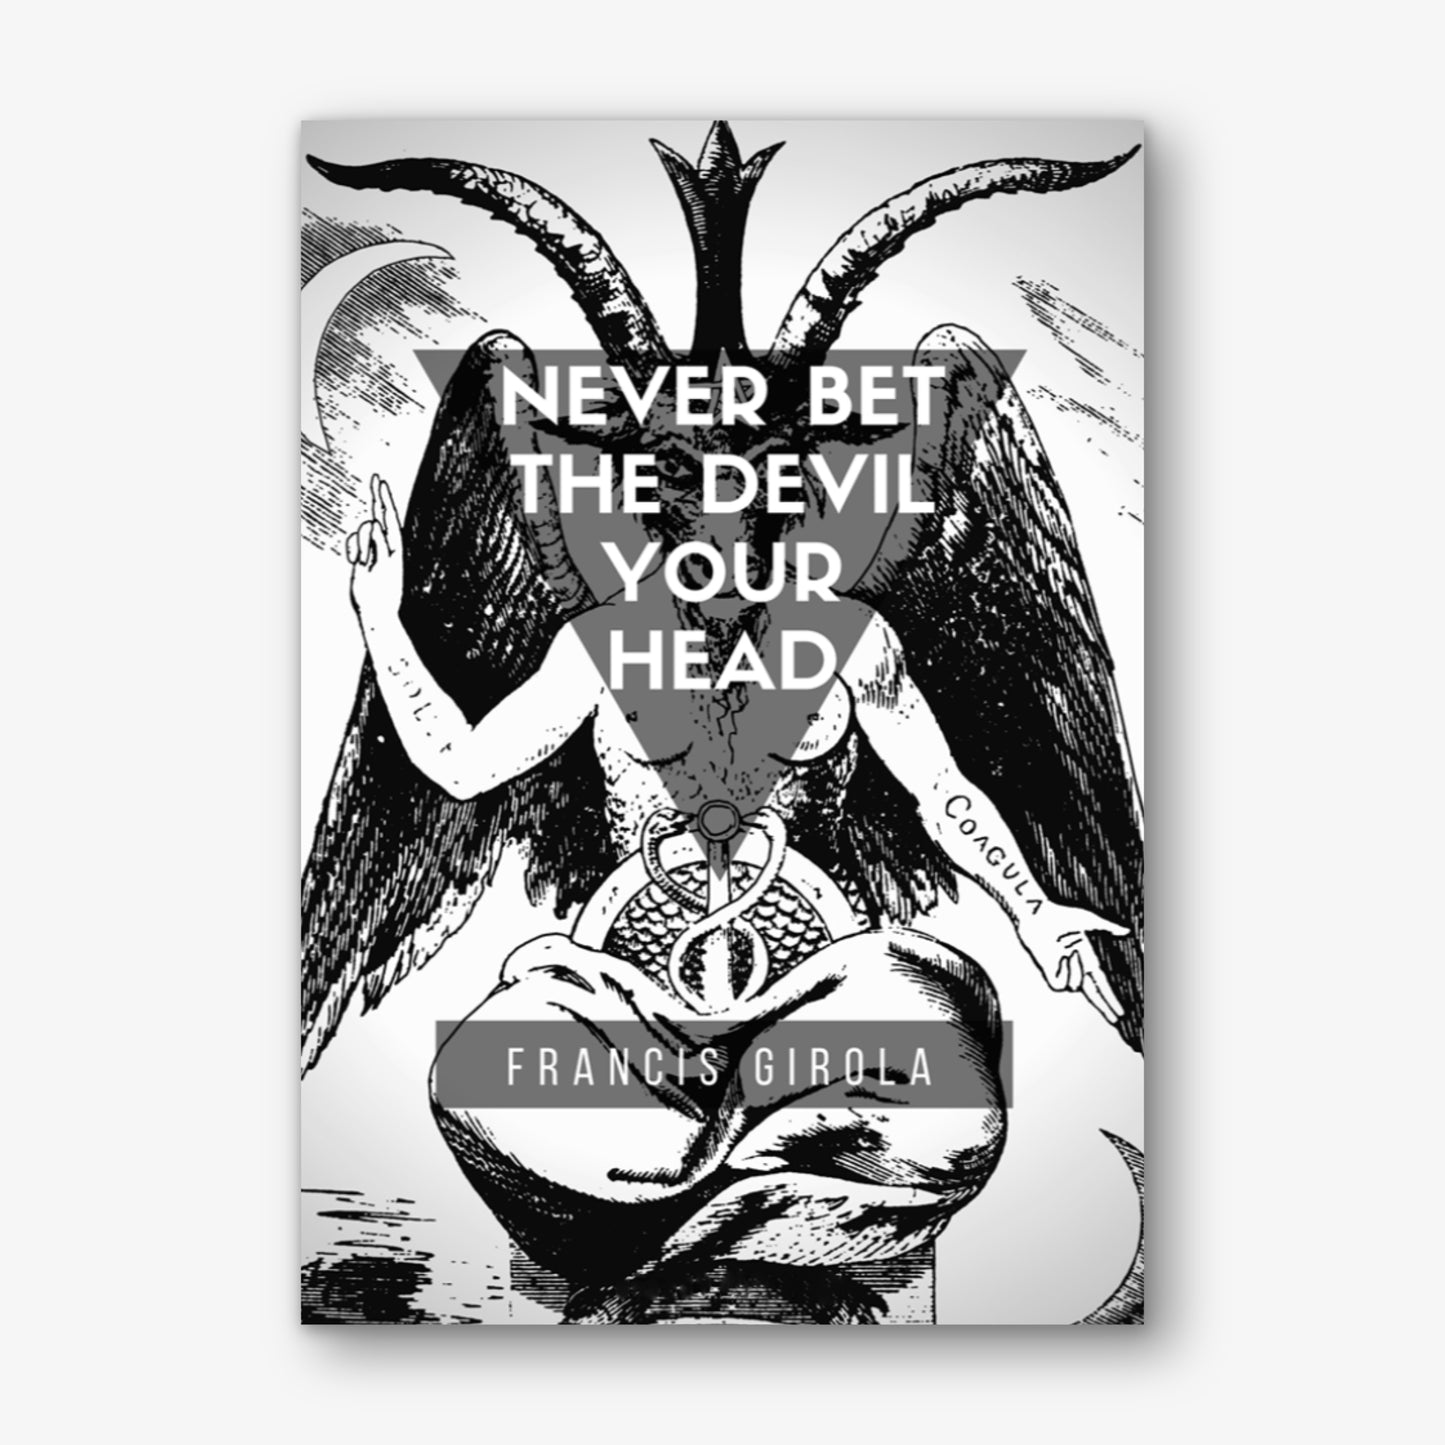 Never Bet The Devil Your Head by Francis Girola